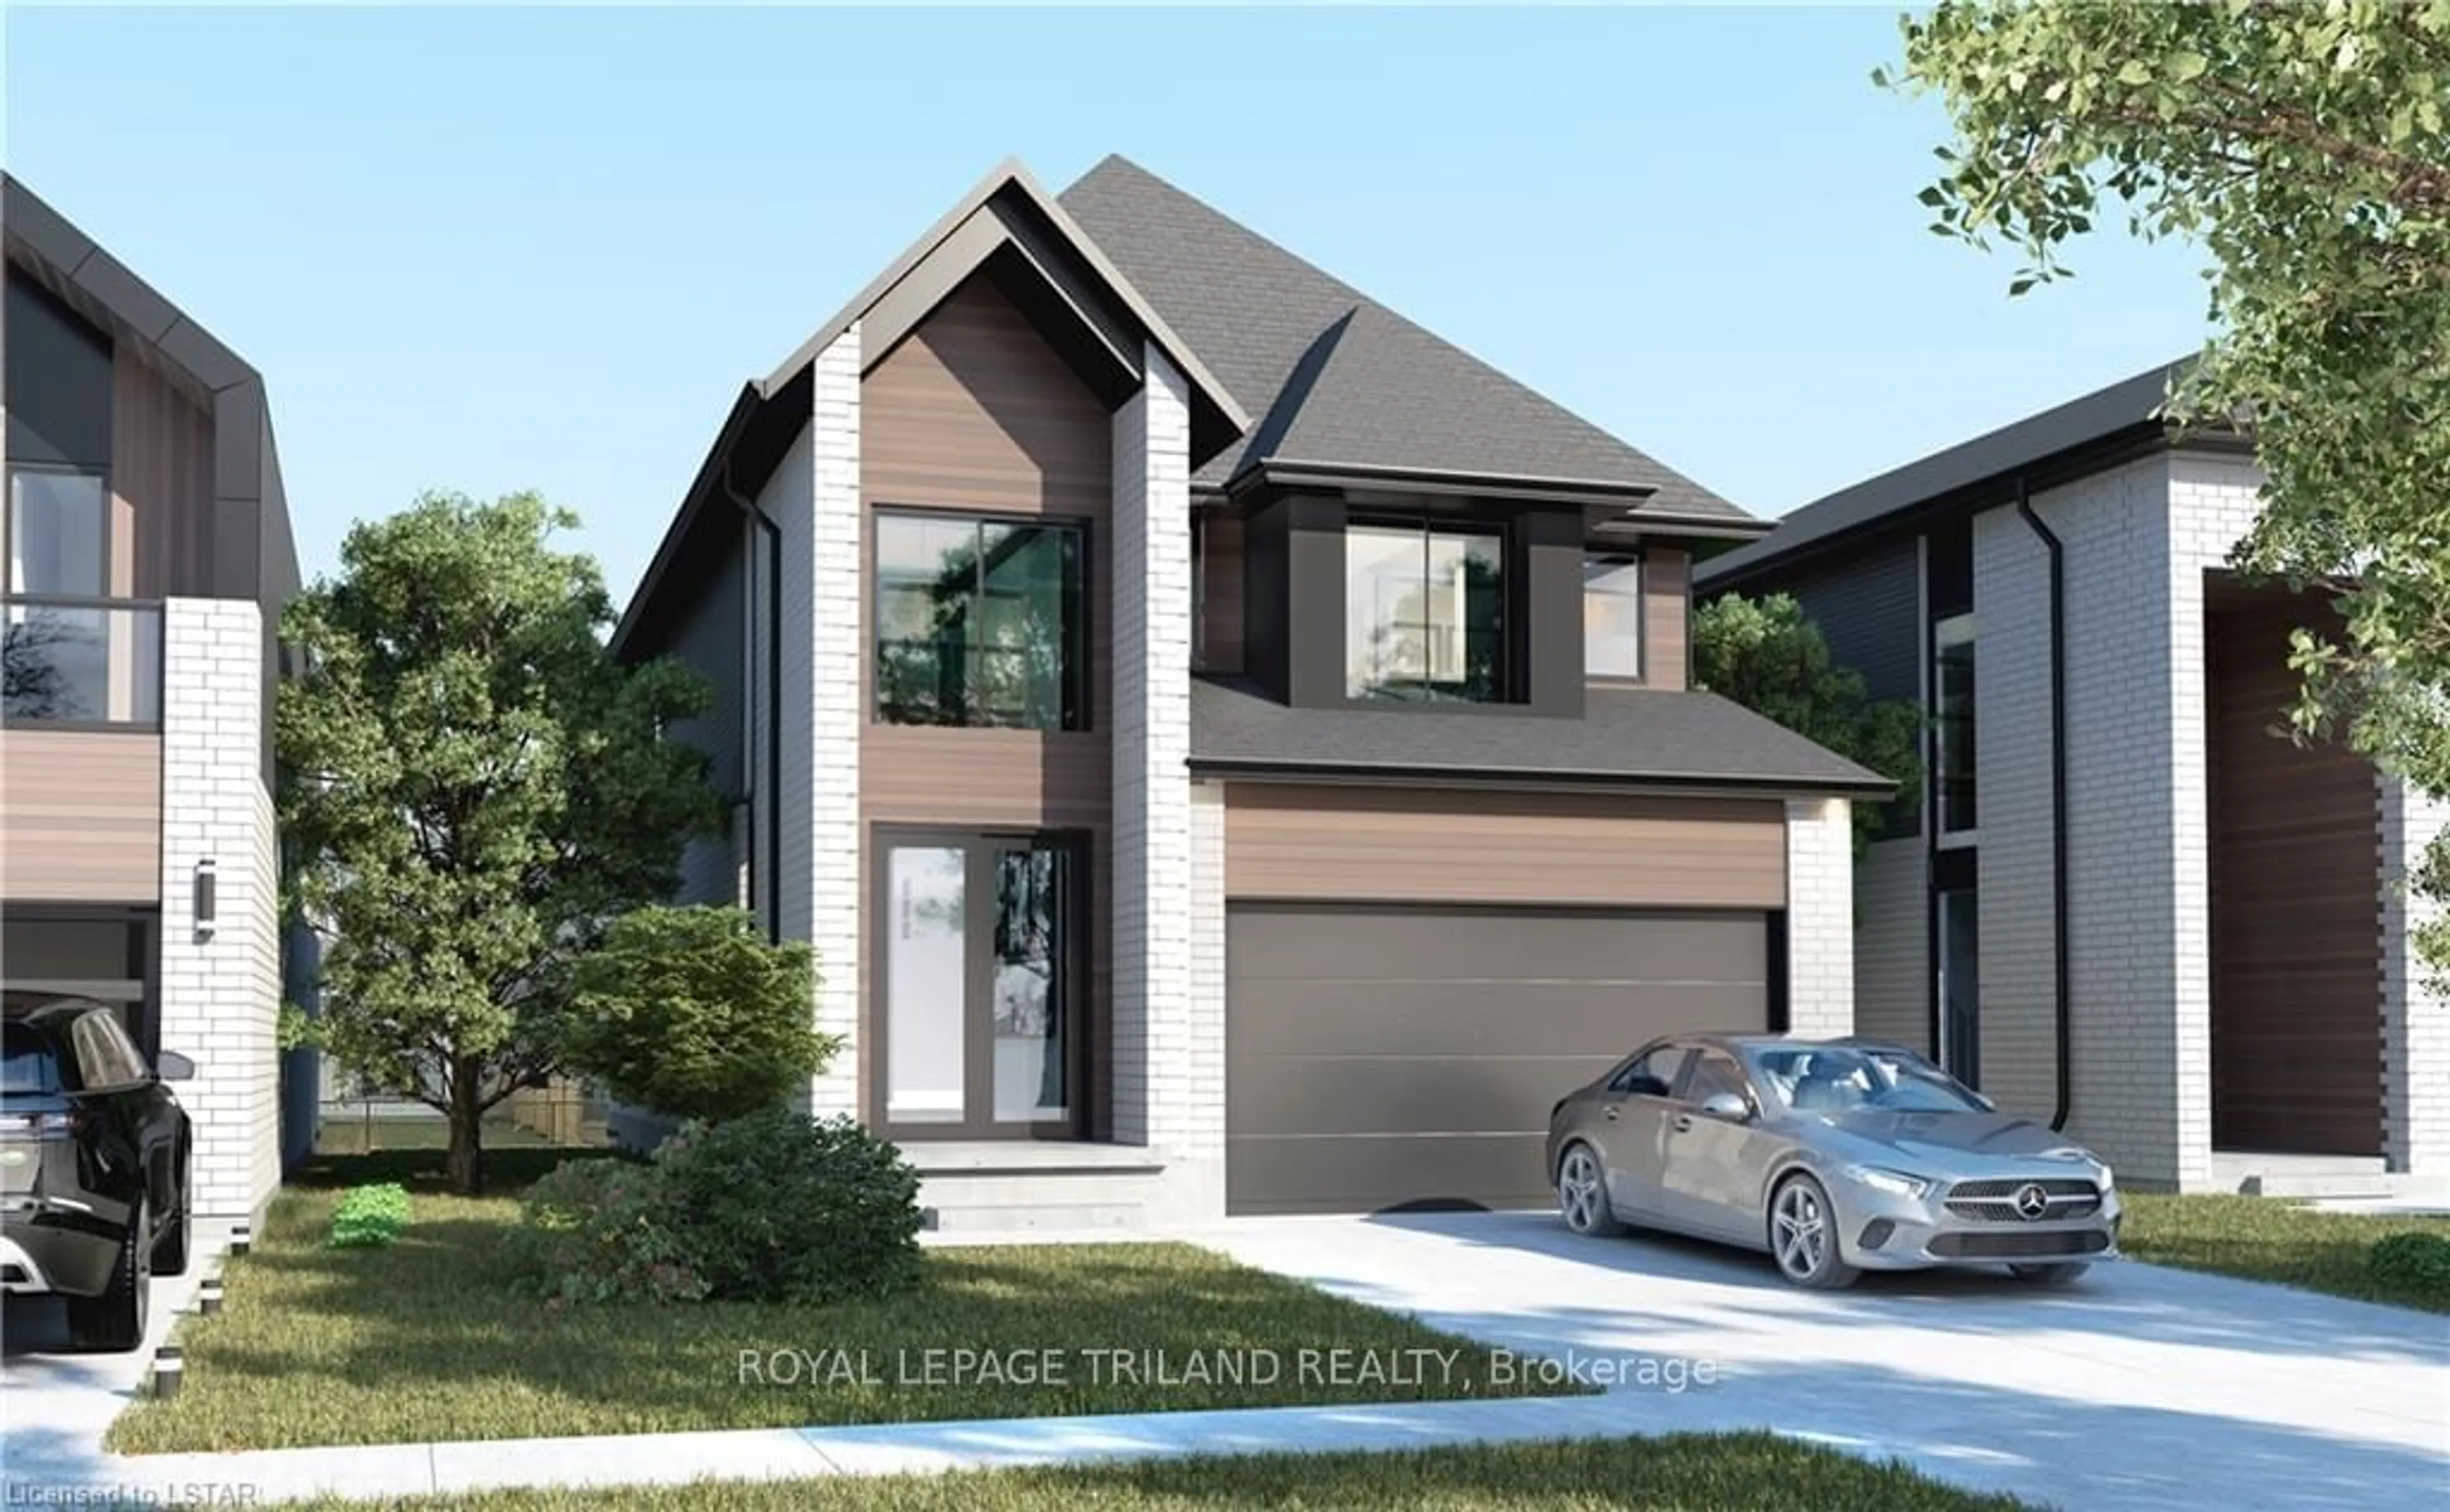 Home with brick exterior material for 3909 Big Leaf Tr, London Ontario N6P 0A3